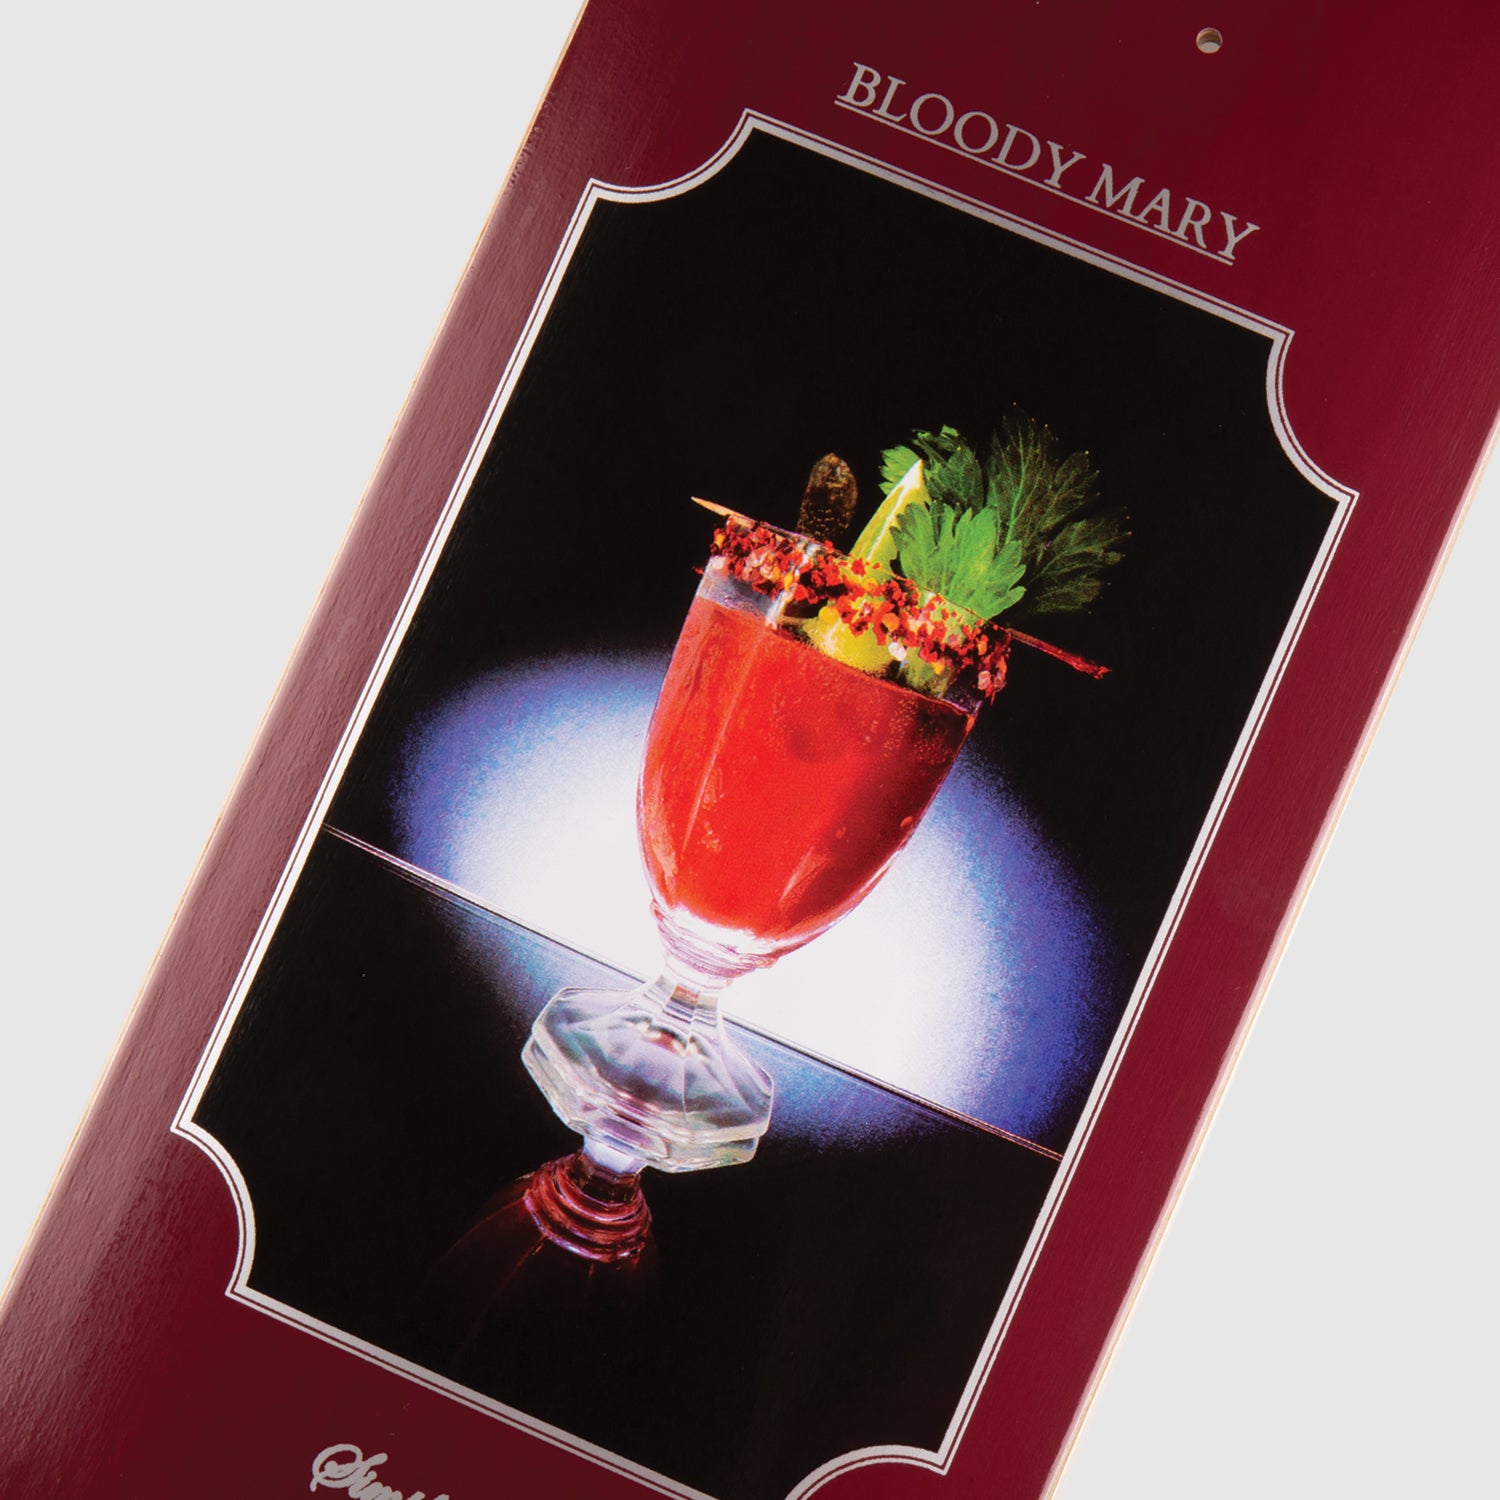 PASS~PORT JACK O'GRADY "BLOODY MARY" COCKTAIL SERIES DECK